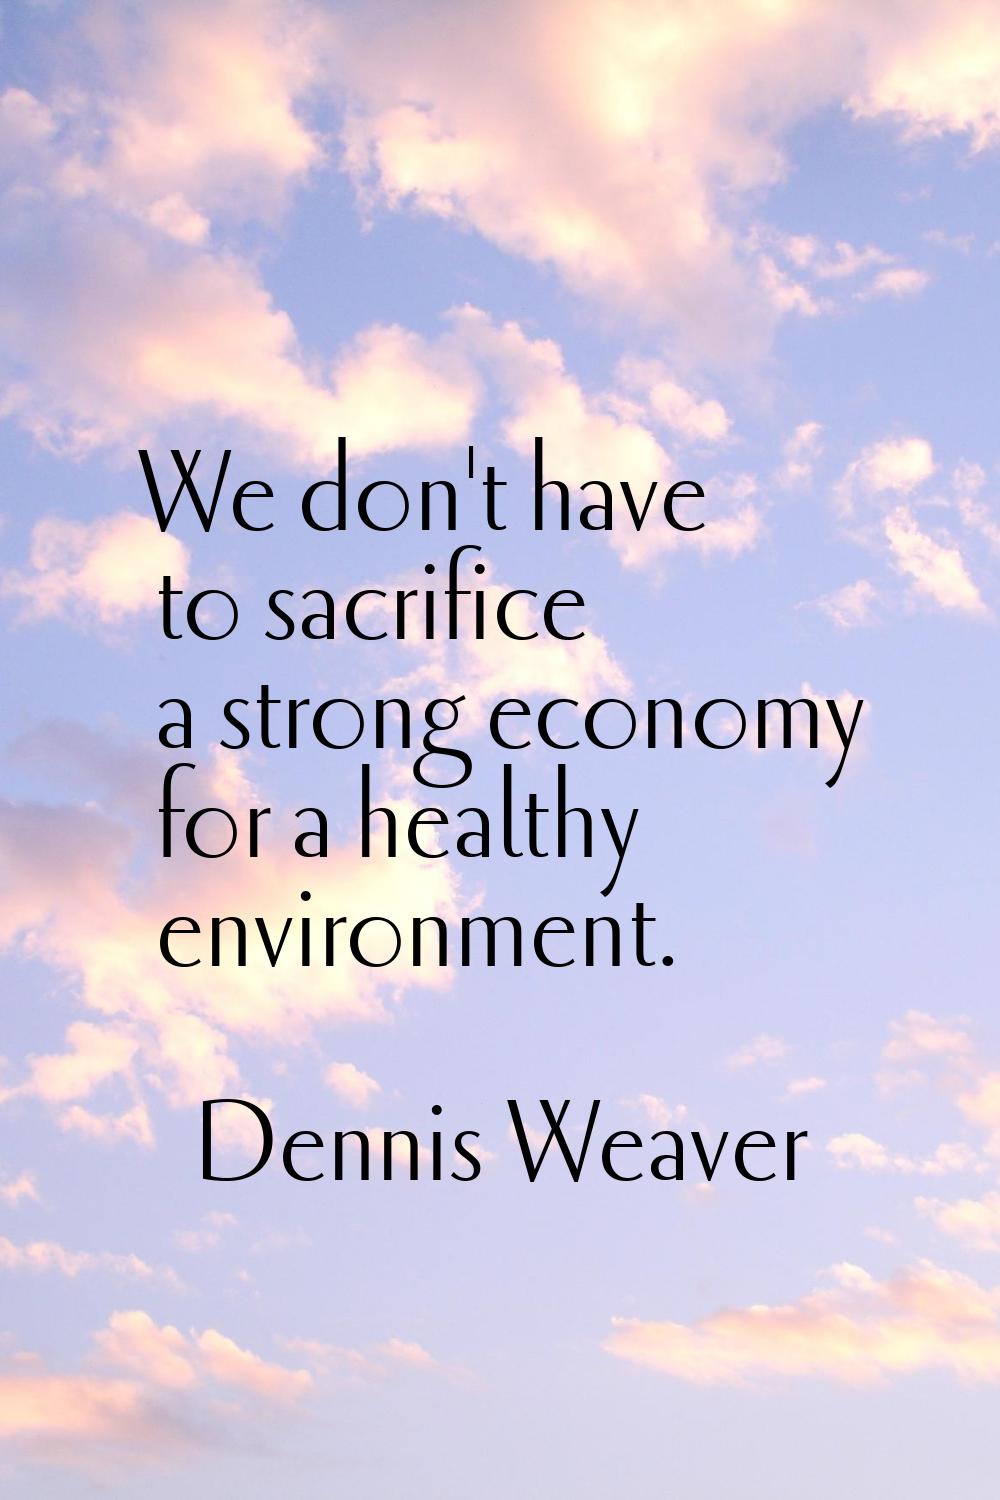 We don't have to sacrifice a strong economy for a healthy environment.